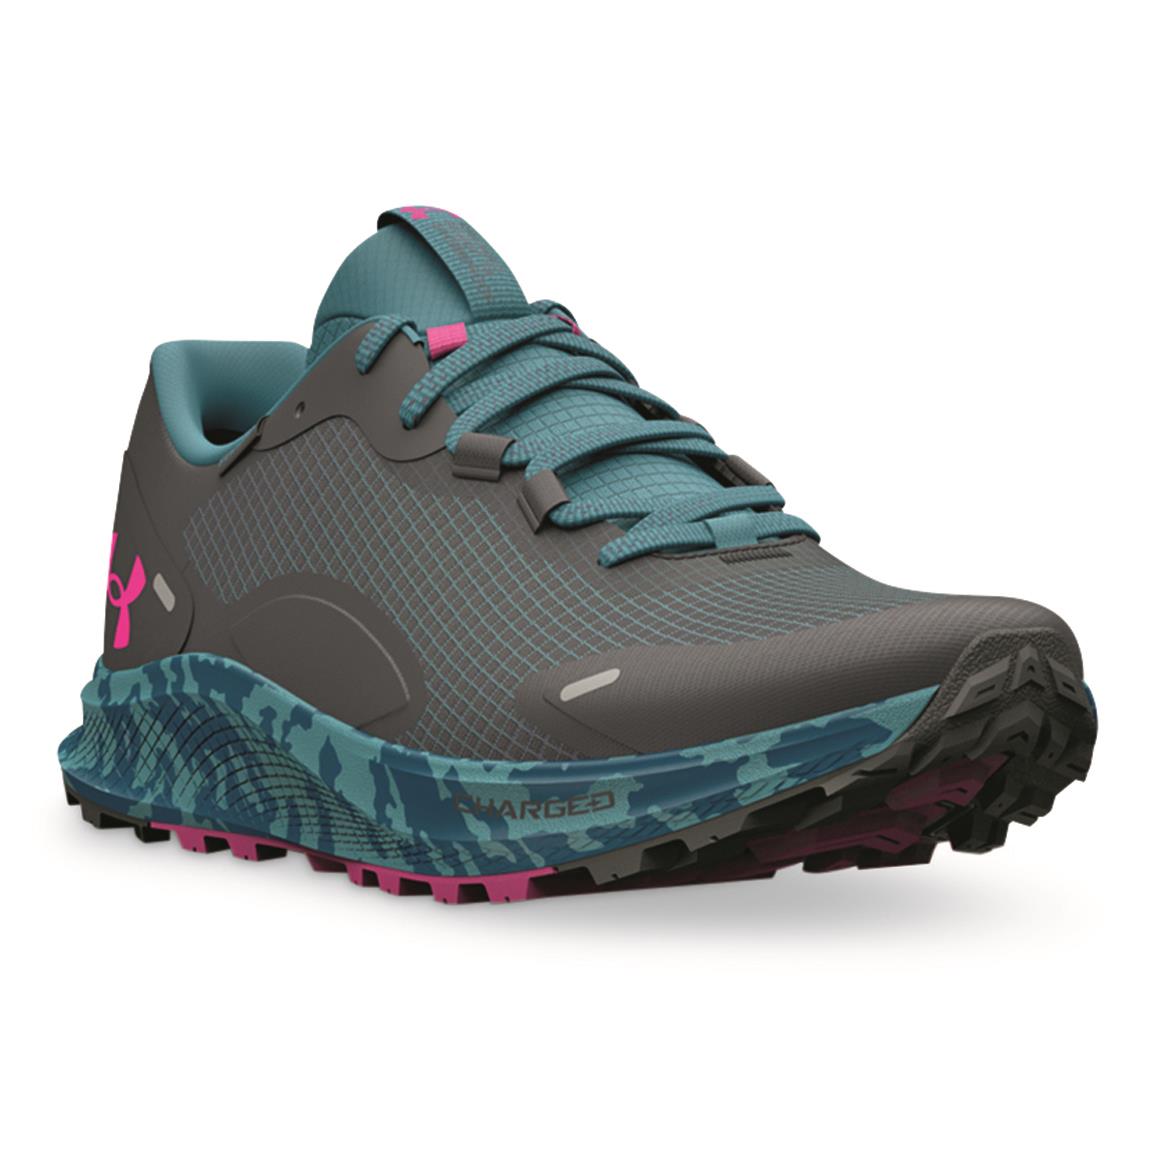 Under Armour Women's Charged Bandit Trail 2 Storm Running Shoes, Jet Gray/still Water/rebel Pink